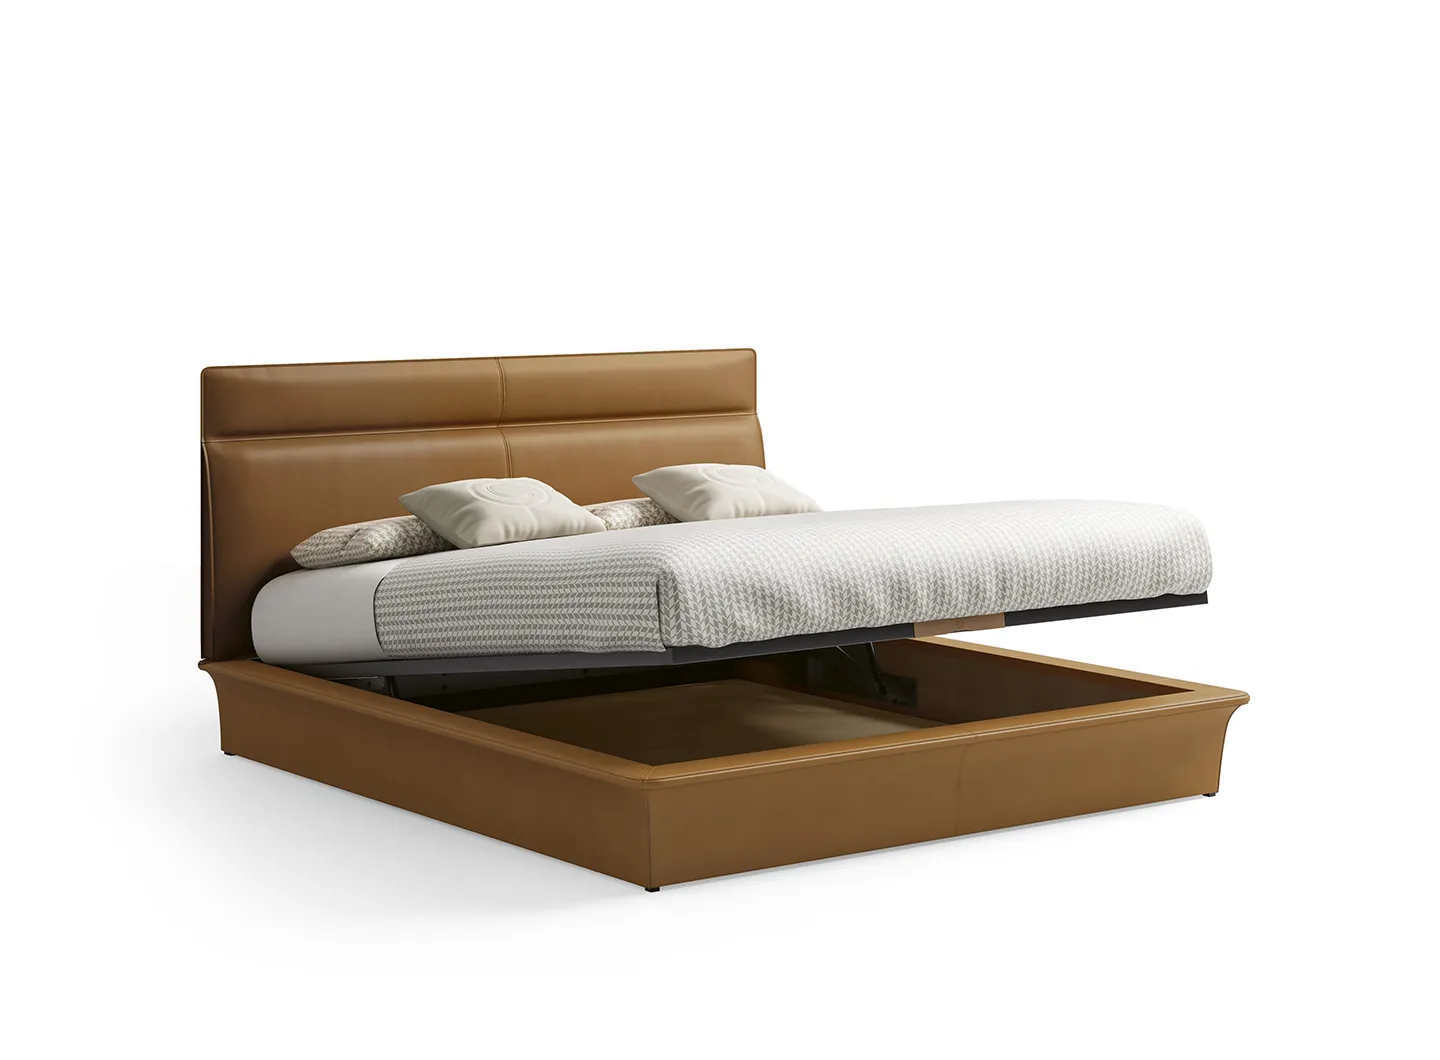 CPRN Homood-Bed in saddle leather